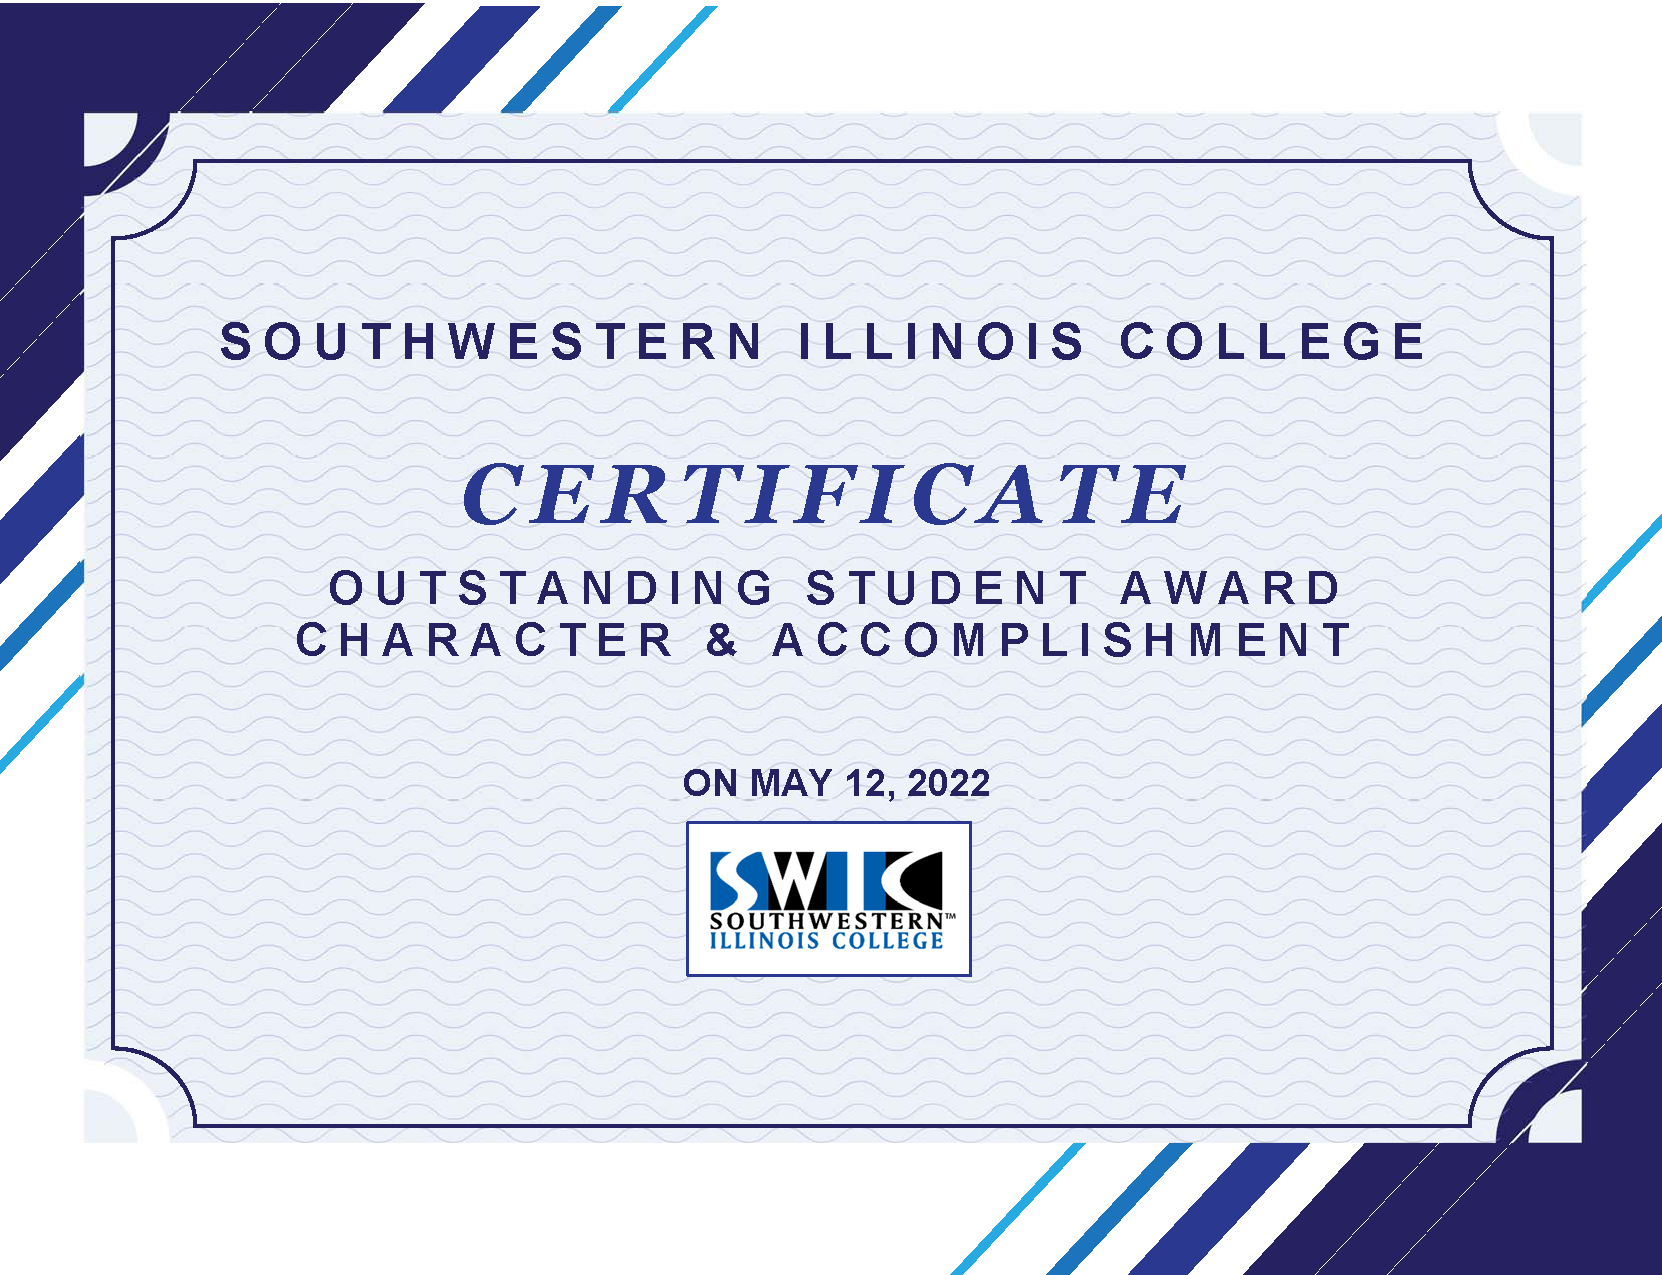 Southwestern Illinois College Certificate Outstanding Character & Accomplishment